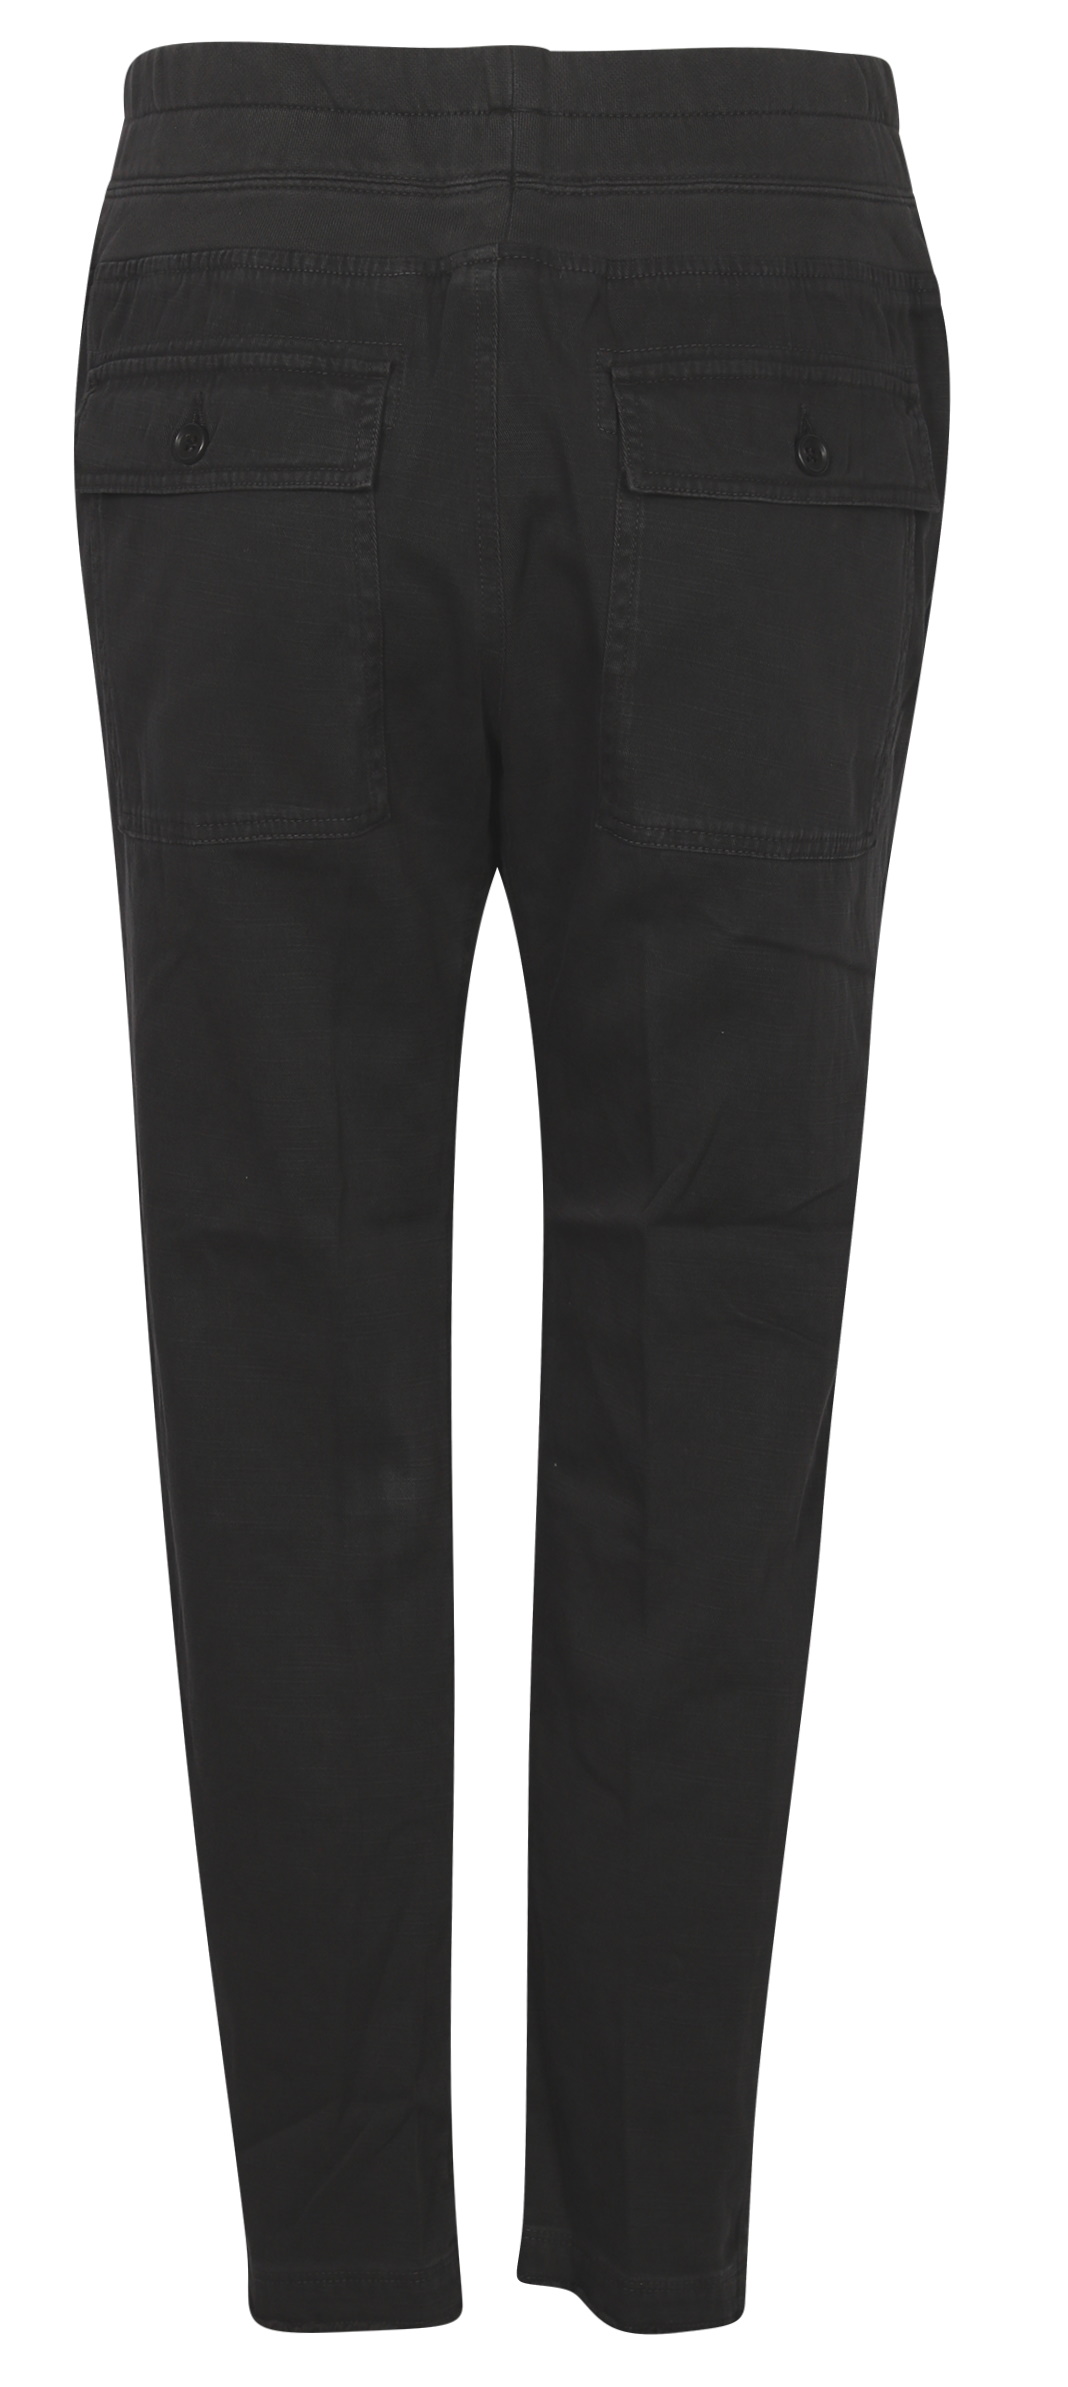 James Perse Mixed Media Pant Washed Carbon